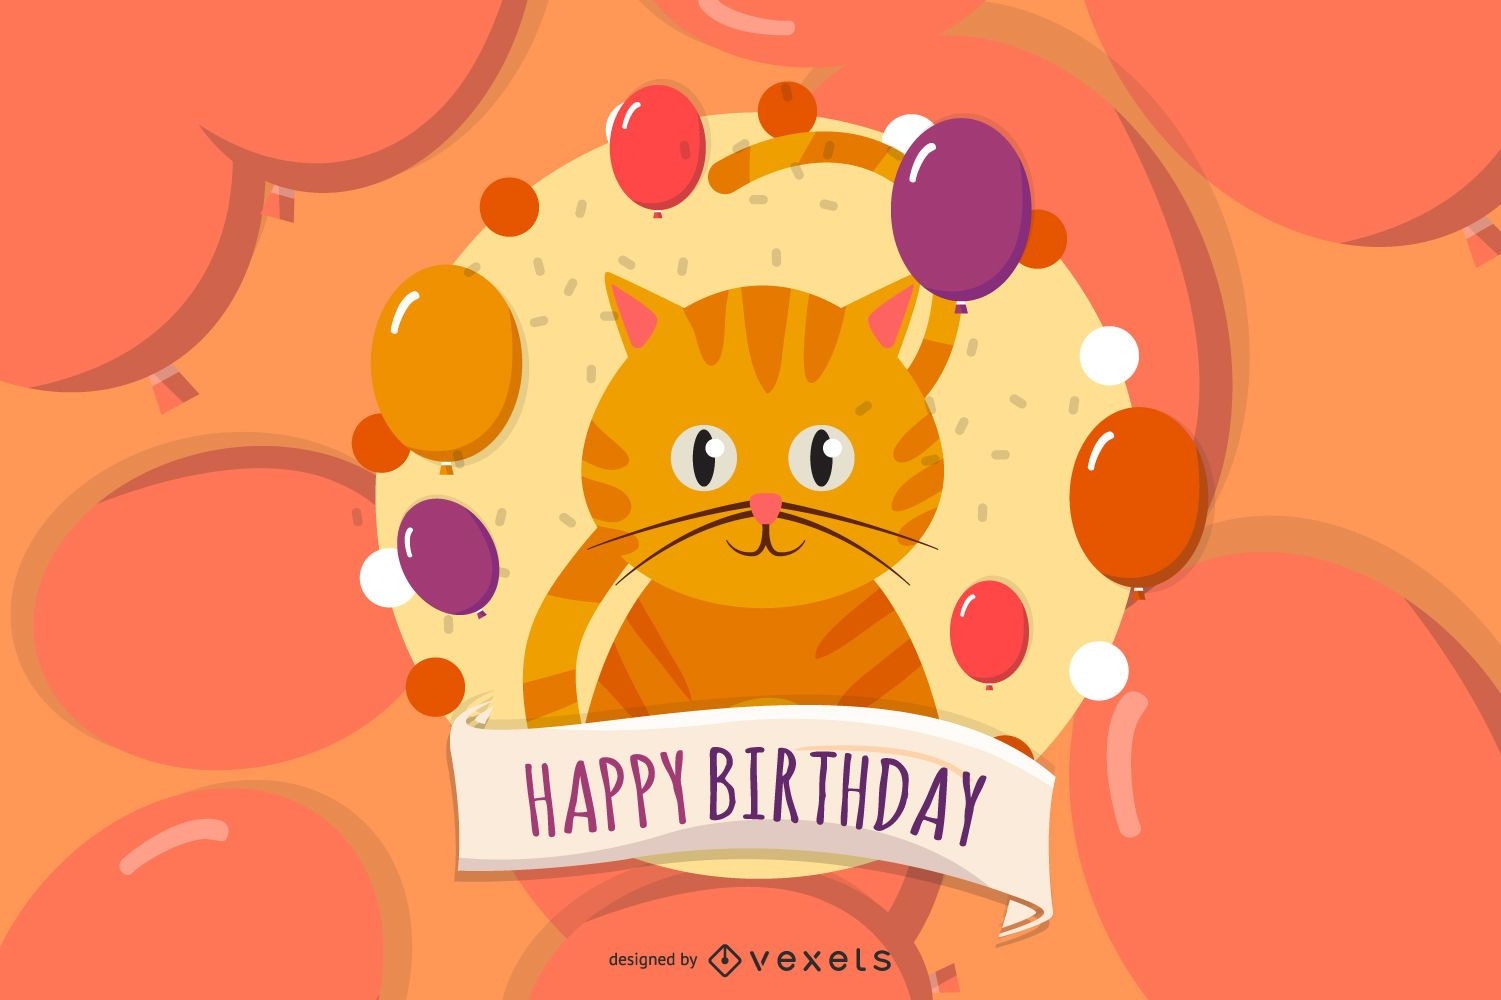 Happy Birthday card with cats - Vector download